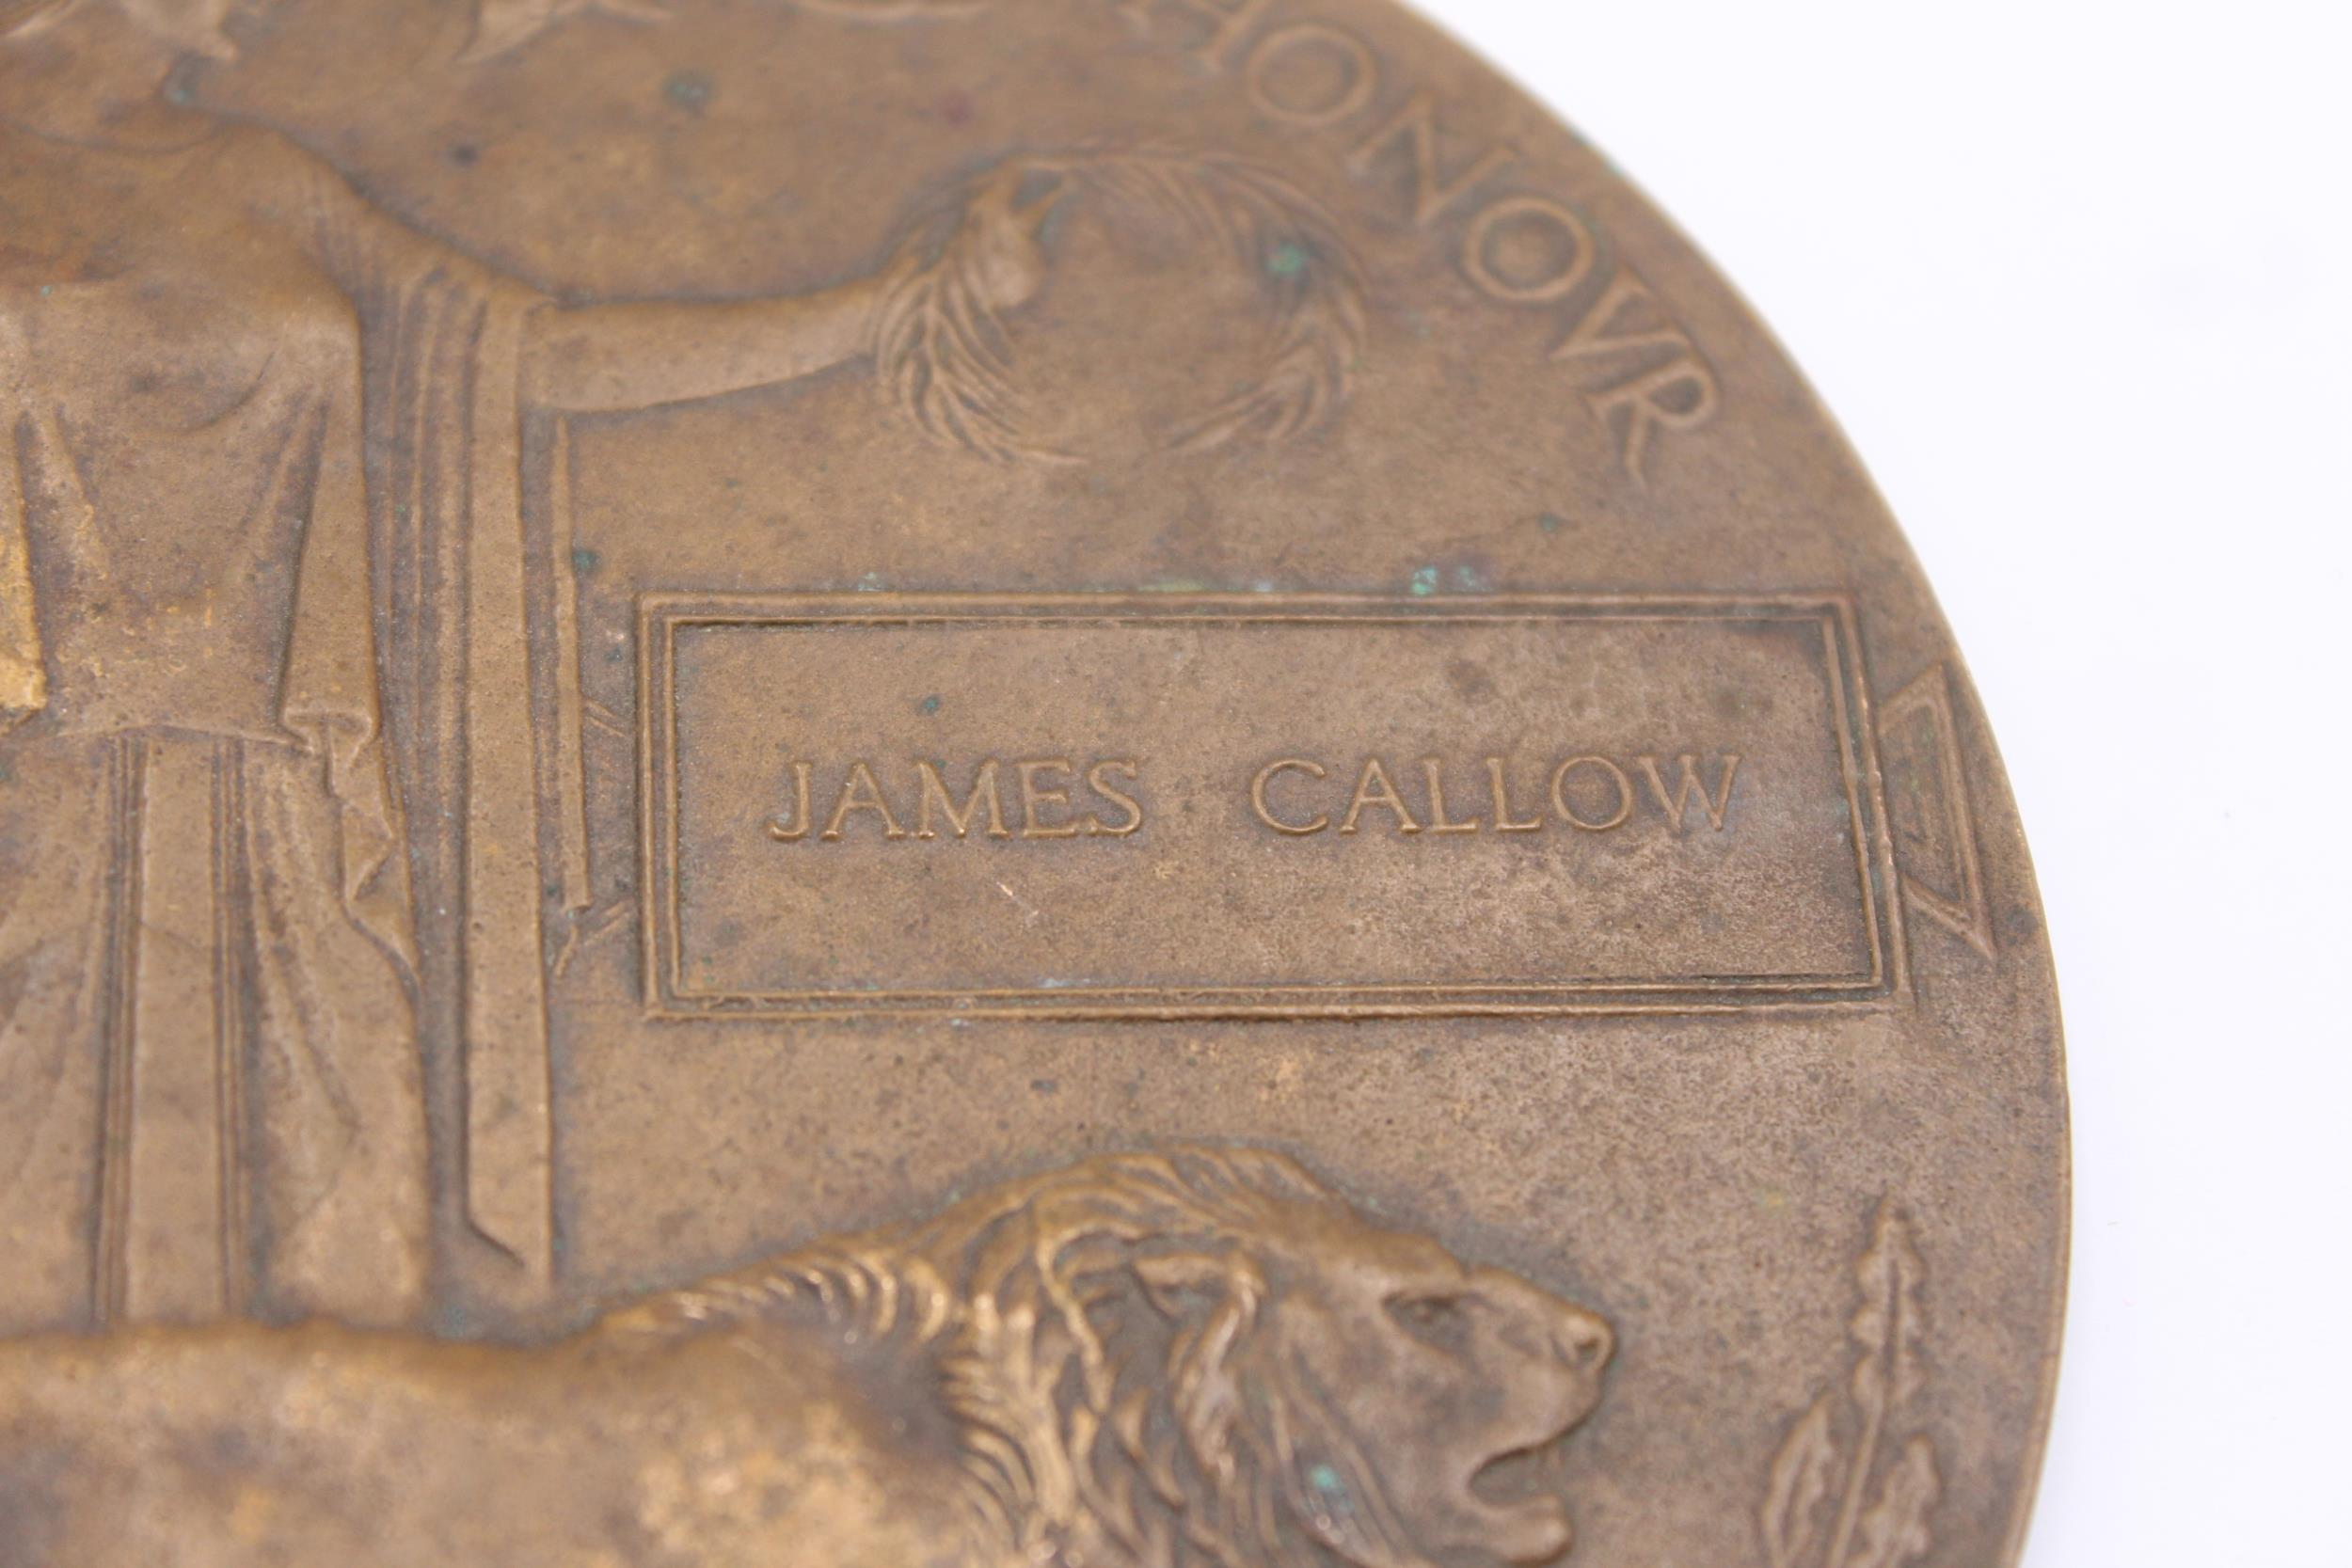 WW1 Death Plaque Named James Callow // WW1 Death Plaque Named James Callow Item in antique condition - Image 2 of 6